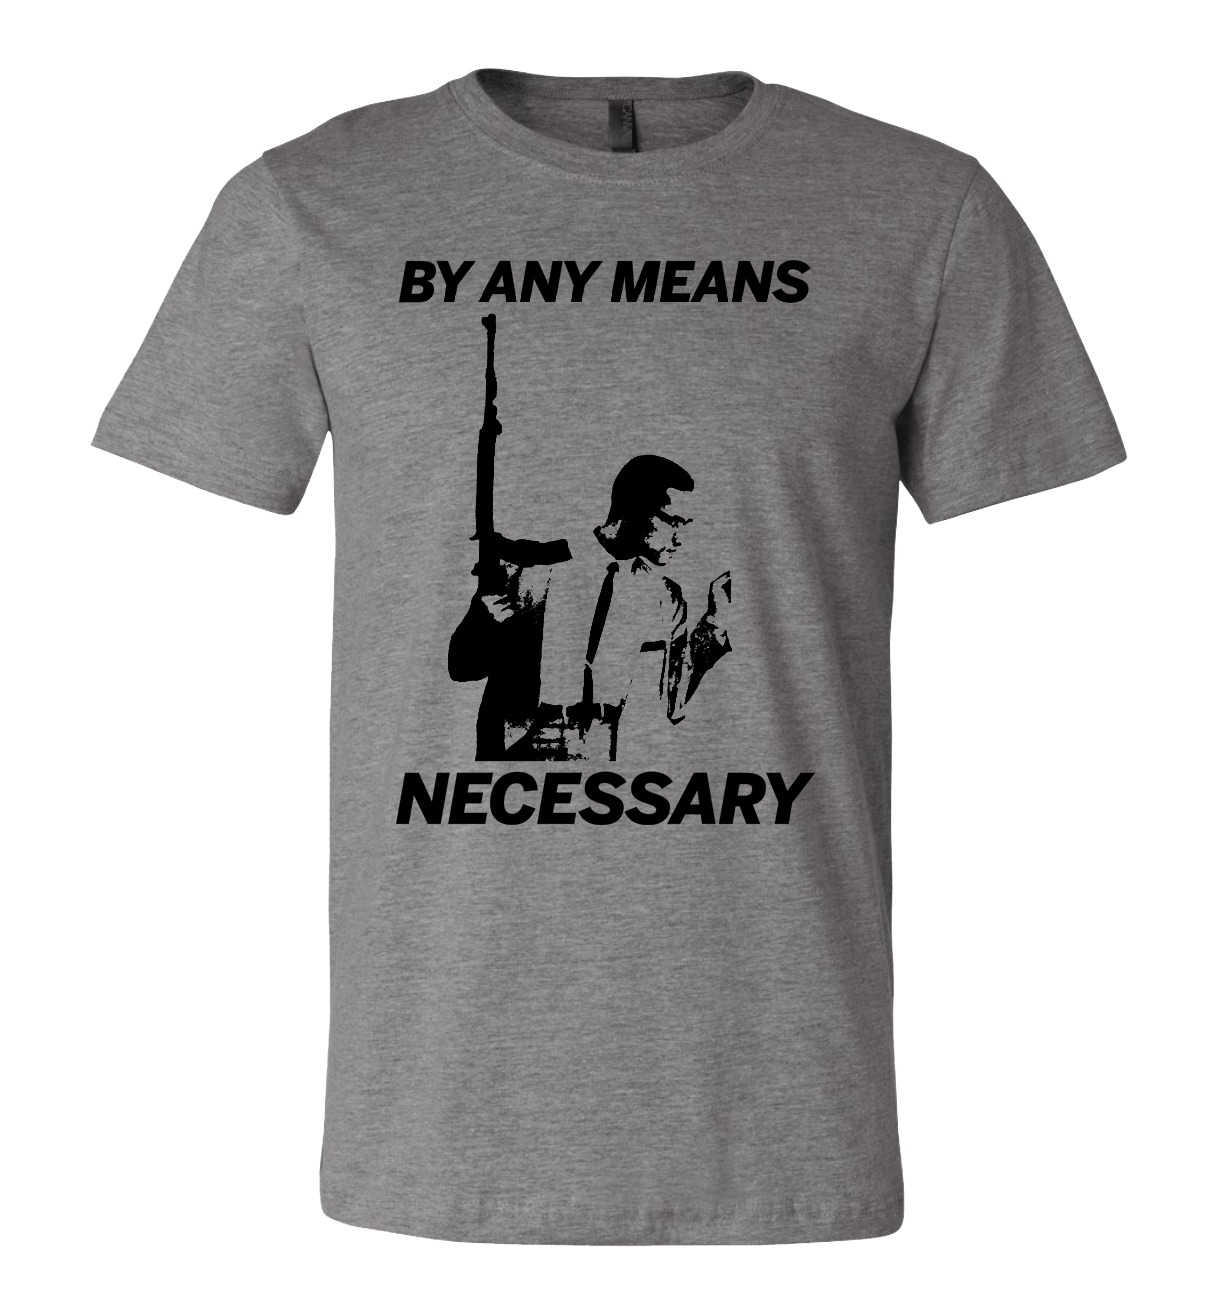 By Any Means Necessary Malcolm X Light Gray Shirt with Black Lettering #BAMN #ByAnyMeansNecessary